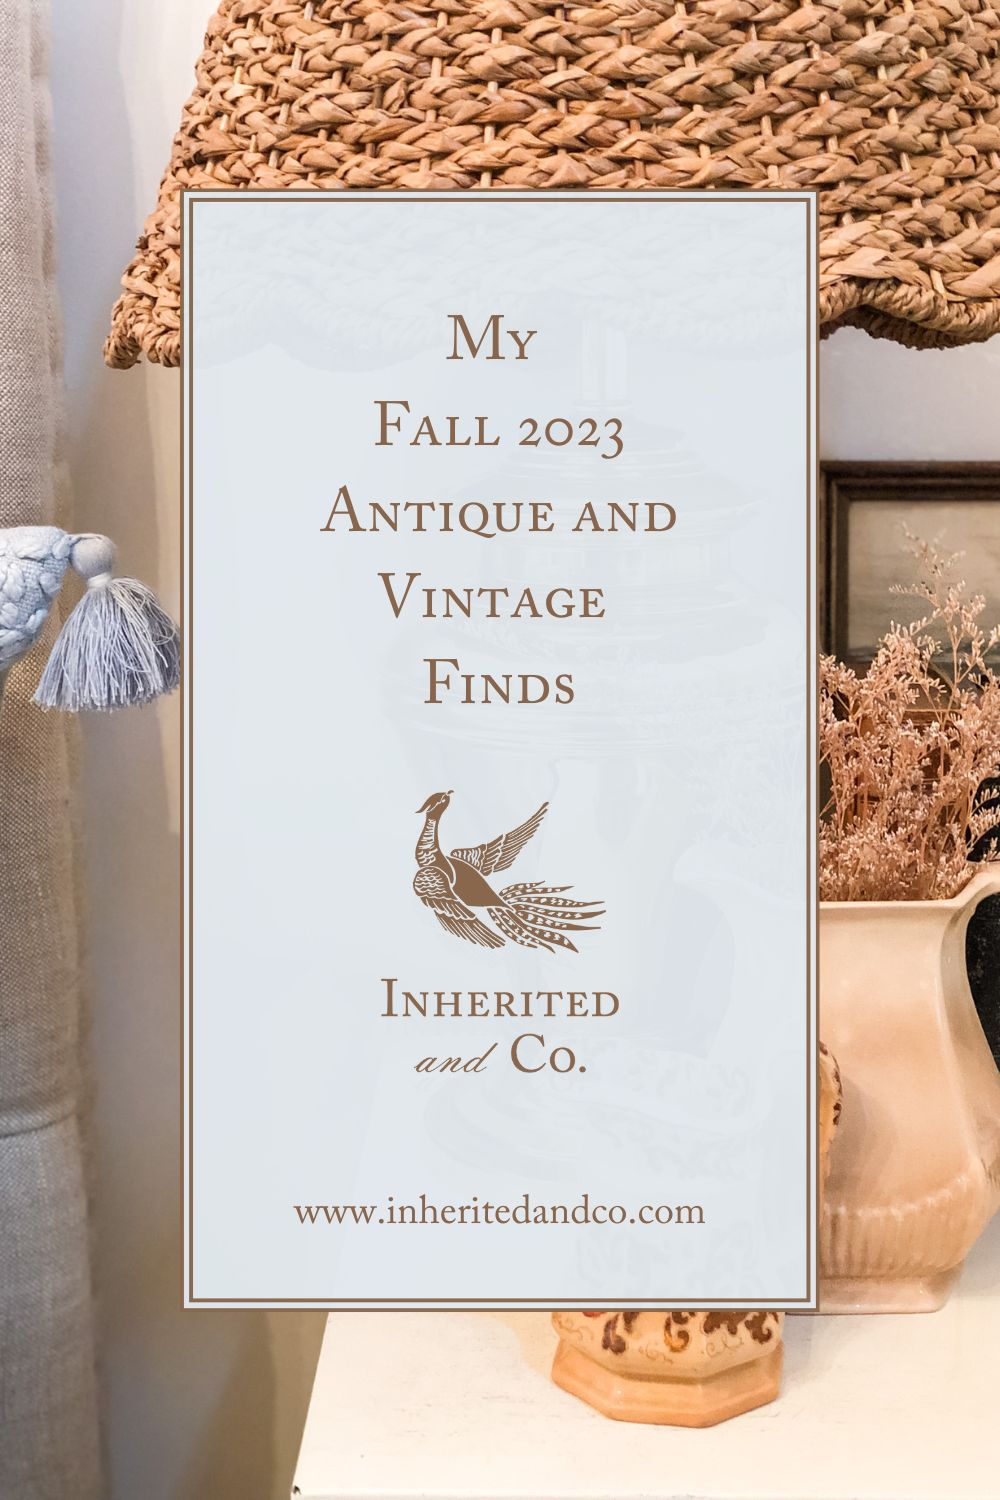 "My Fall 2023 Antique and Vintage Finds"